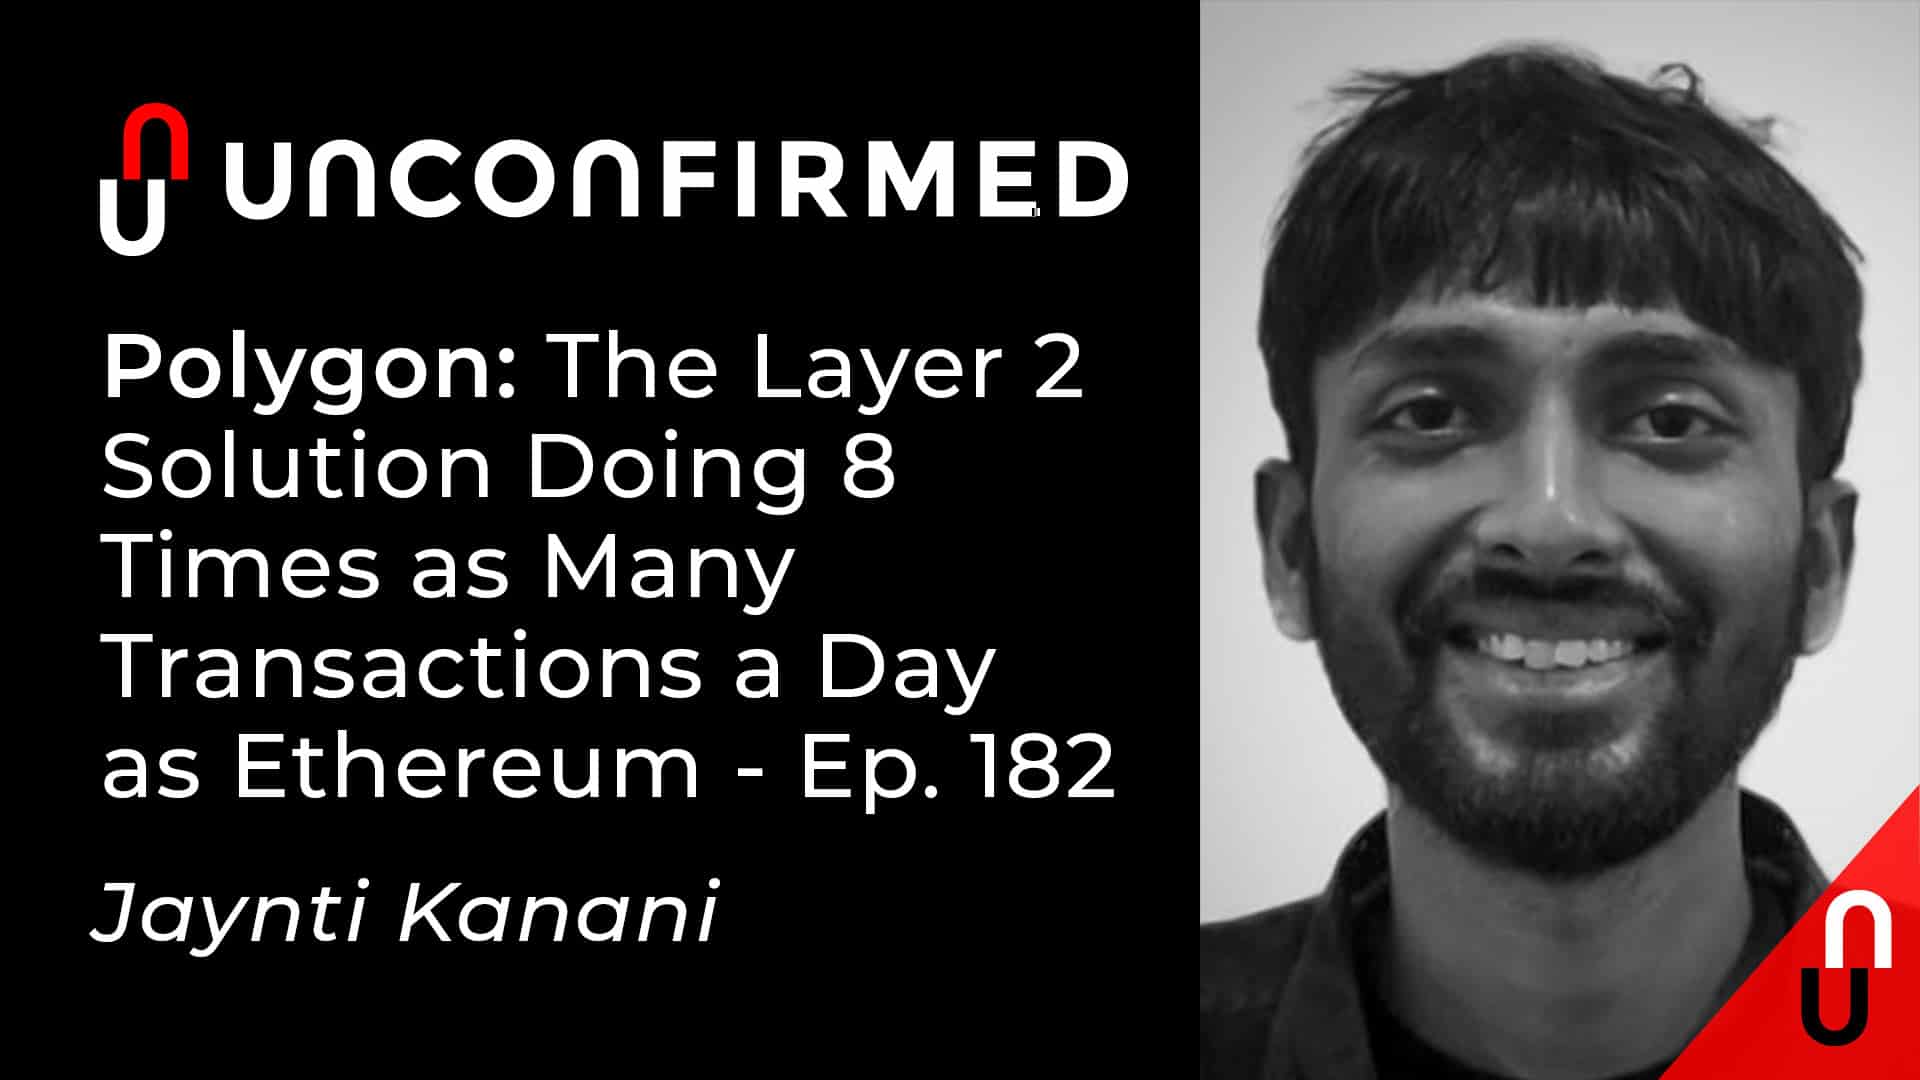 Unconfirmed - Ep.182 - Polygon - The Layer 2 Solution Doing 8 Times as Many Transactions a Day as Ethereum